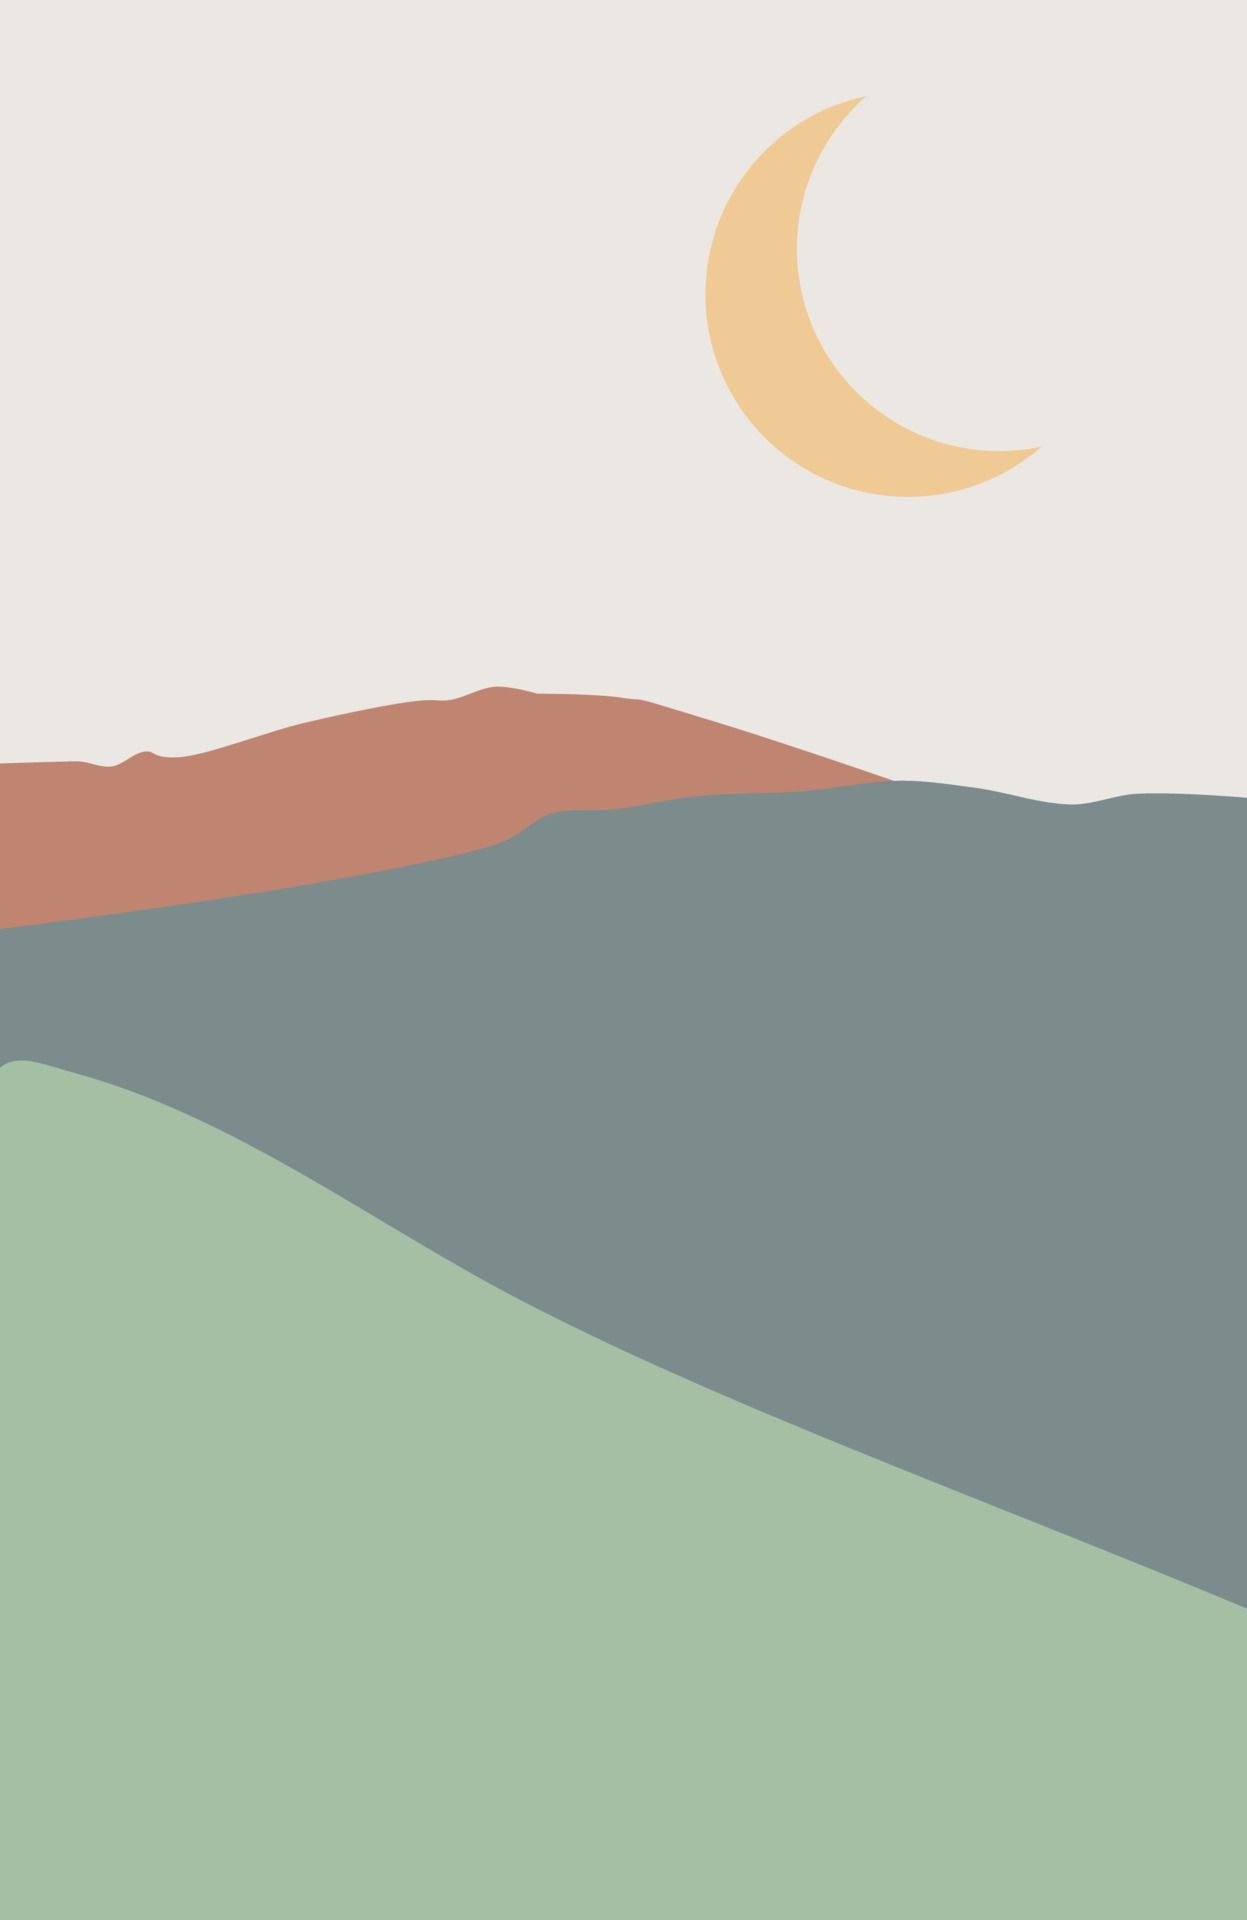 A minimalist landscape illustration with a green hill under a crescent moon - Minimalist, abstract, mountain, landscape